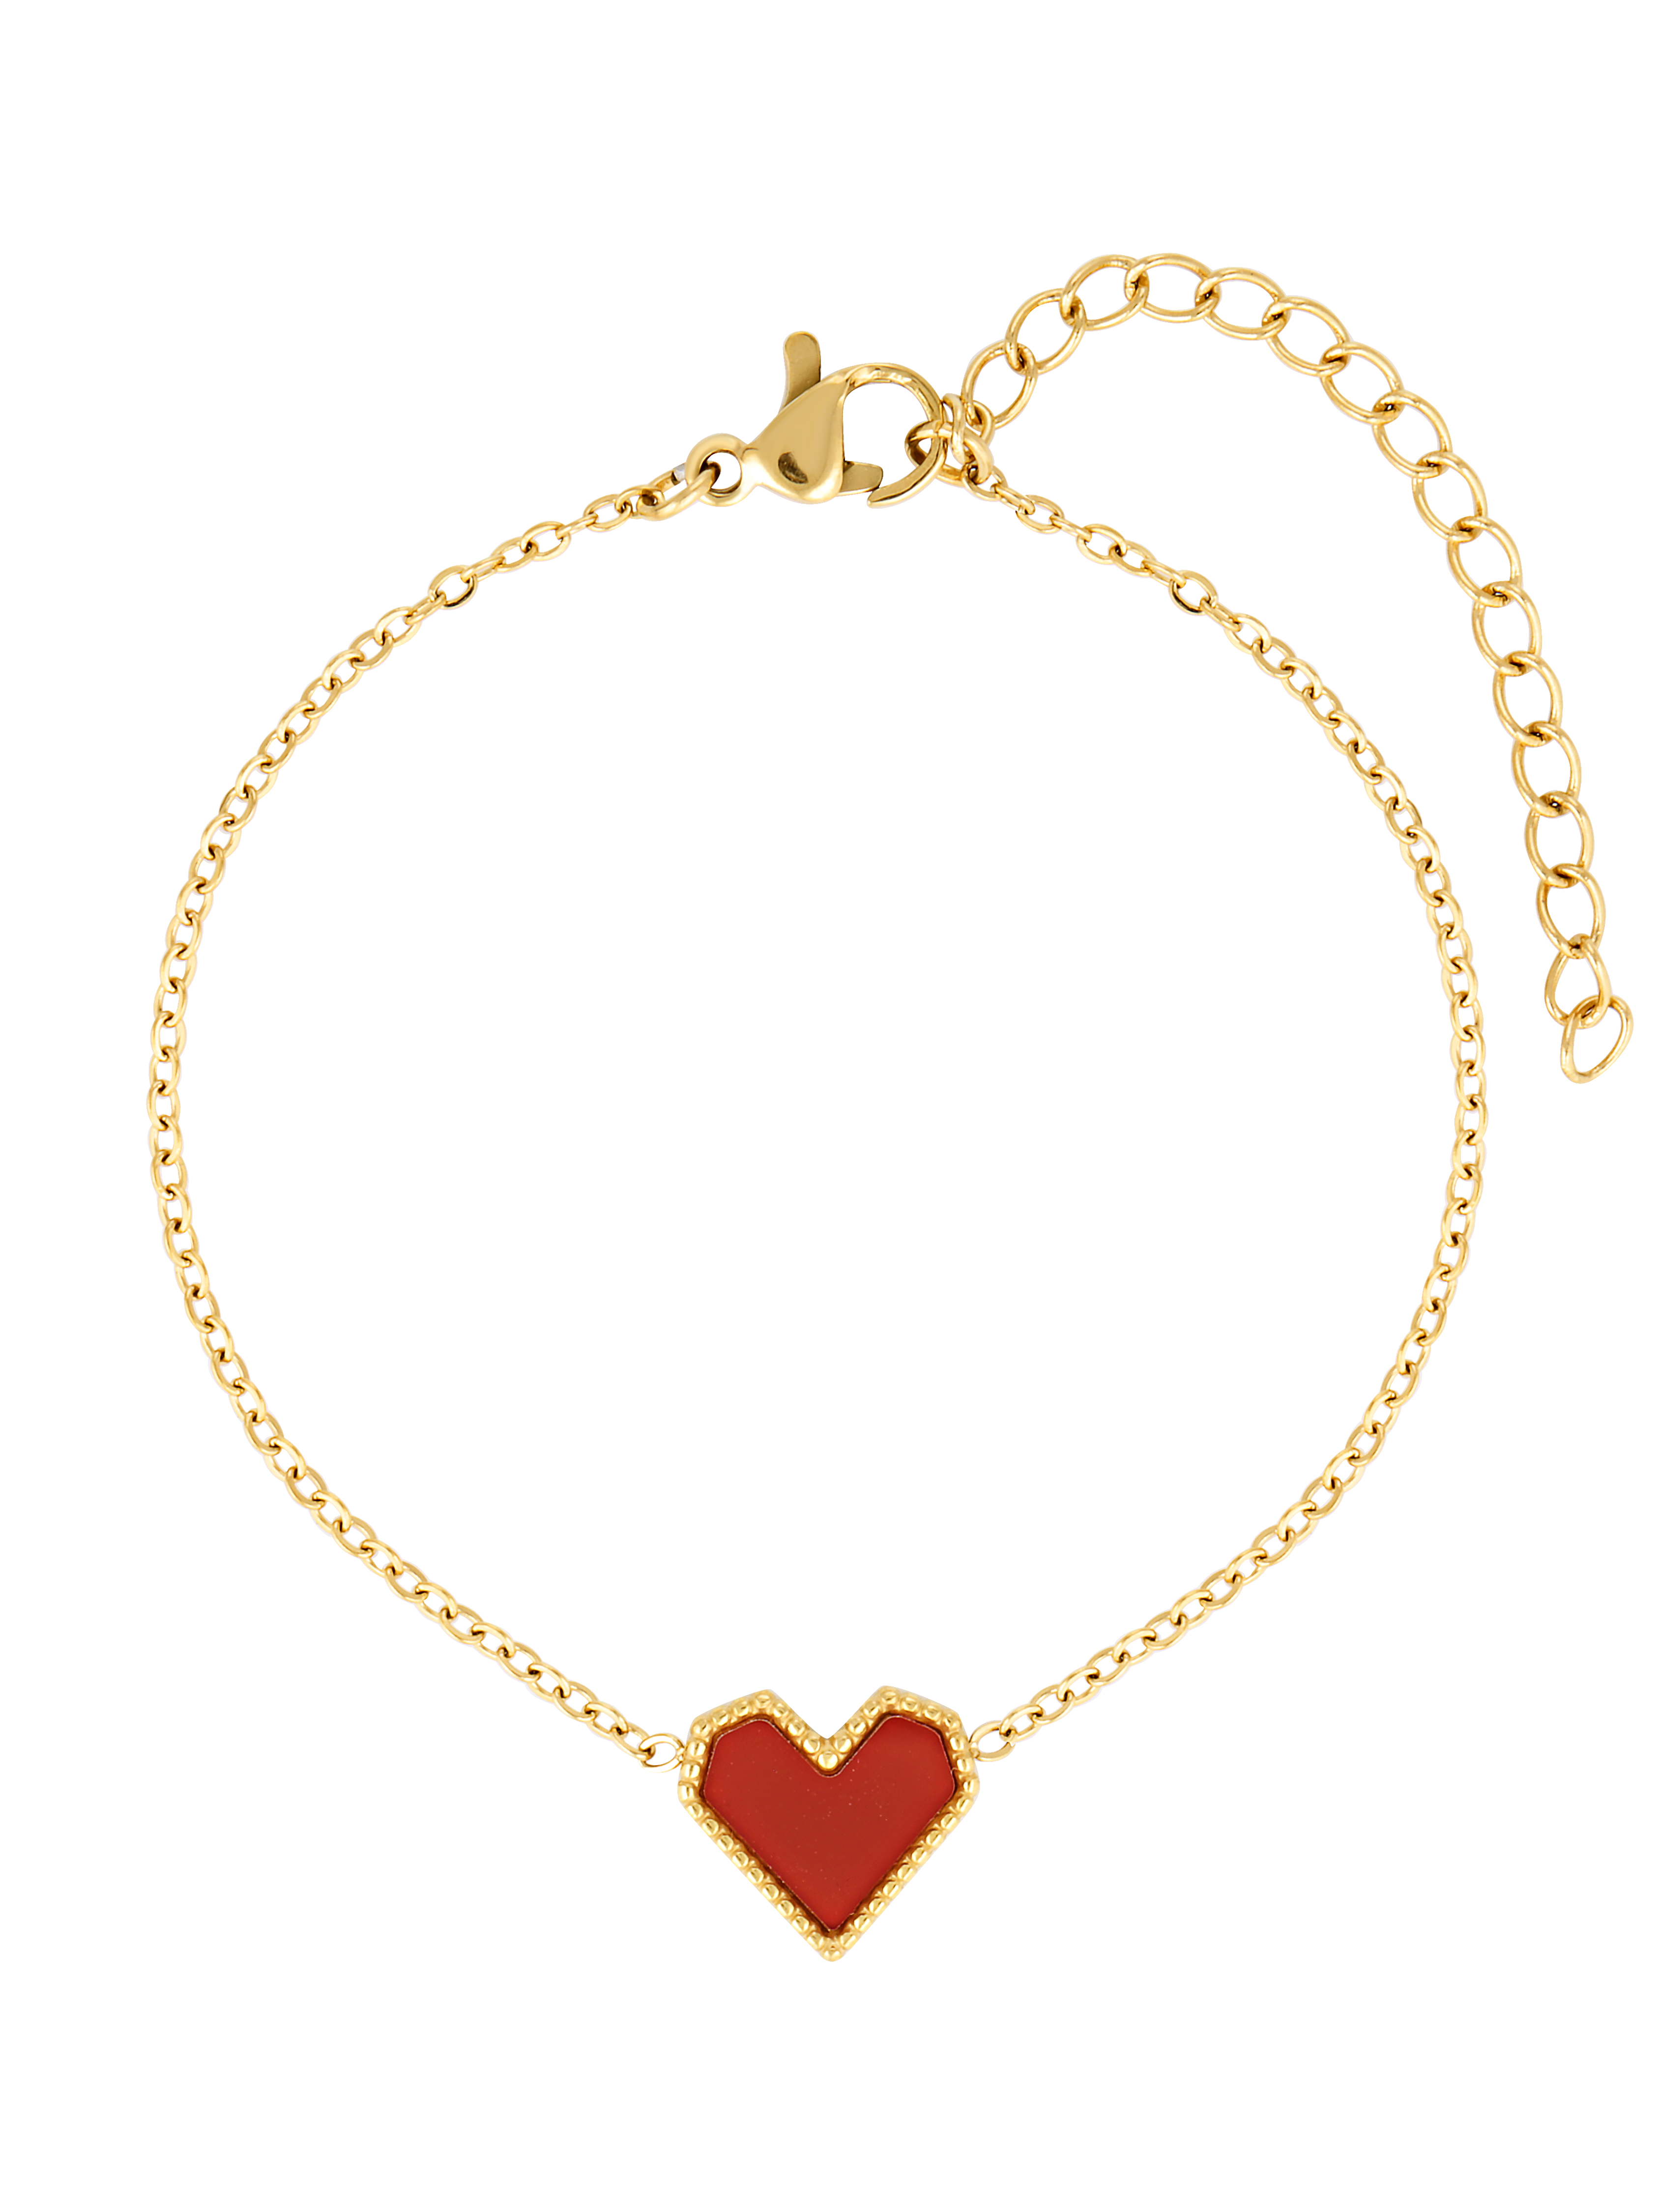 Moods Bracelet. Red and black heart shaped pendant on a gold fill chain